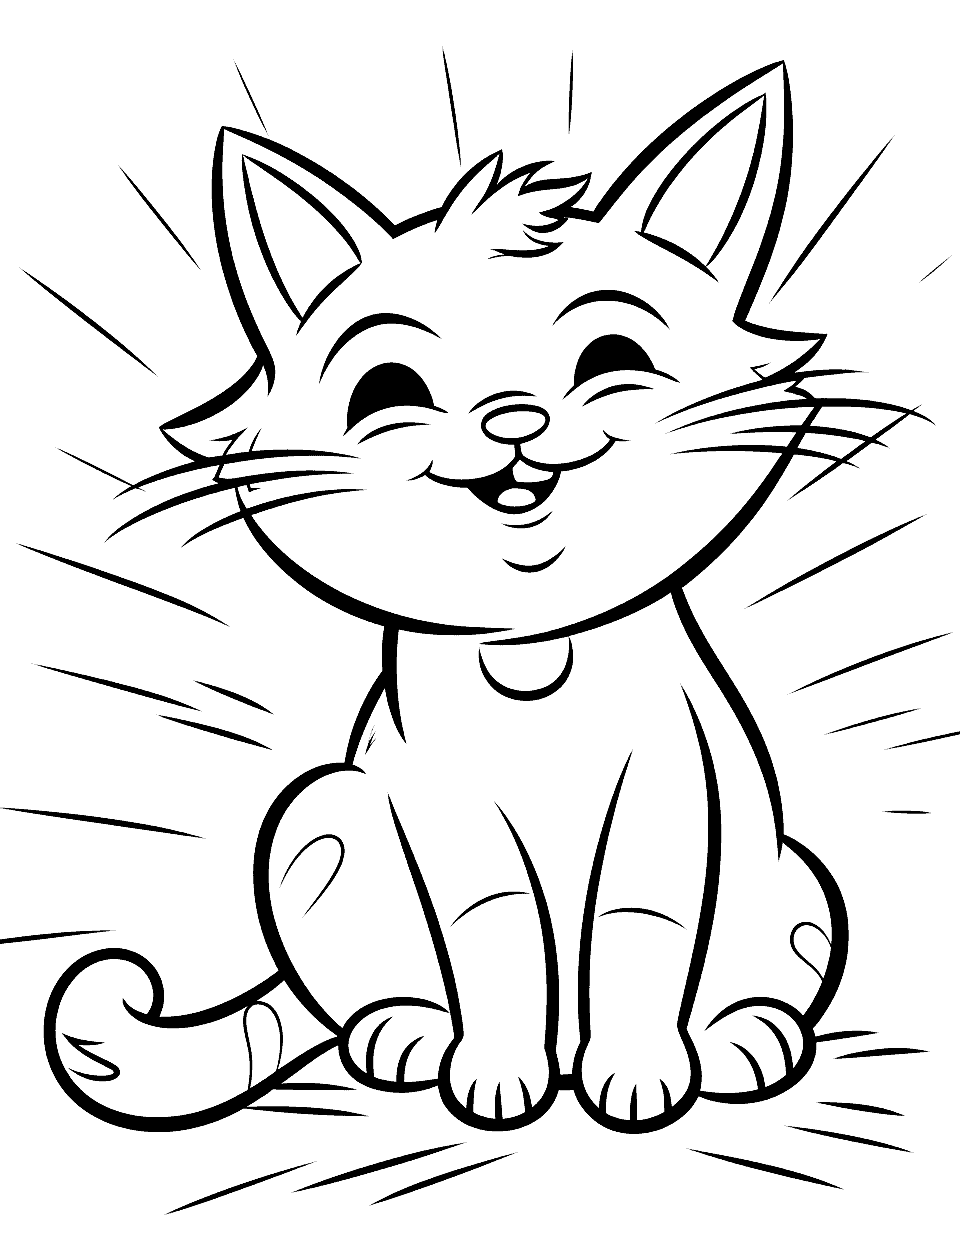 Happy Cat Animal Coloring Page - A content cat lounging in a sunny spot and stretching its paws.